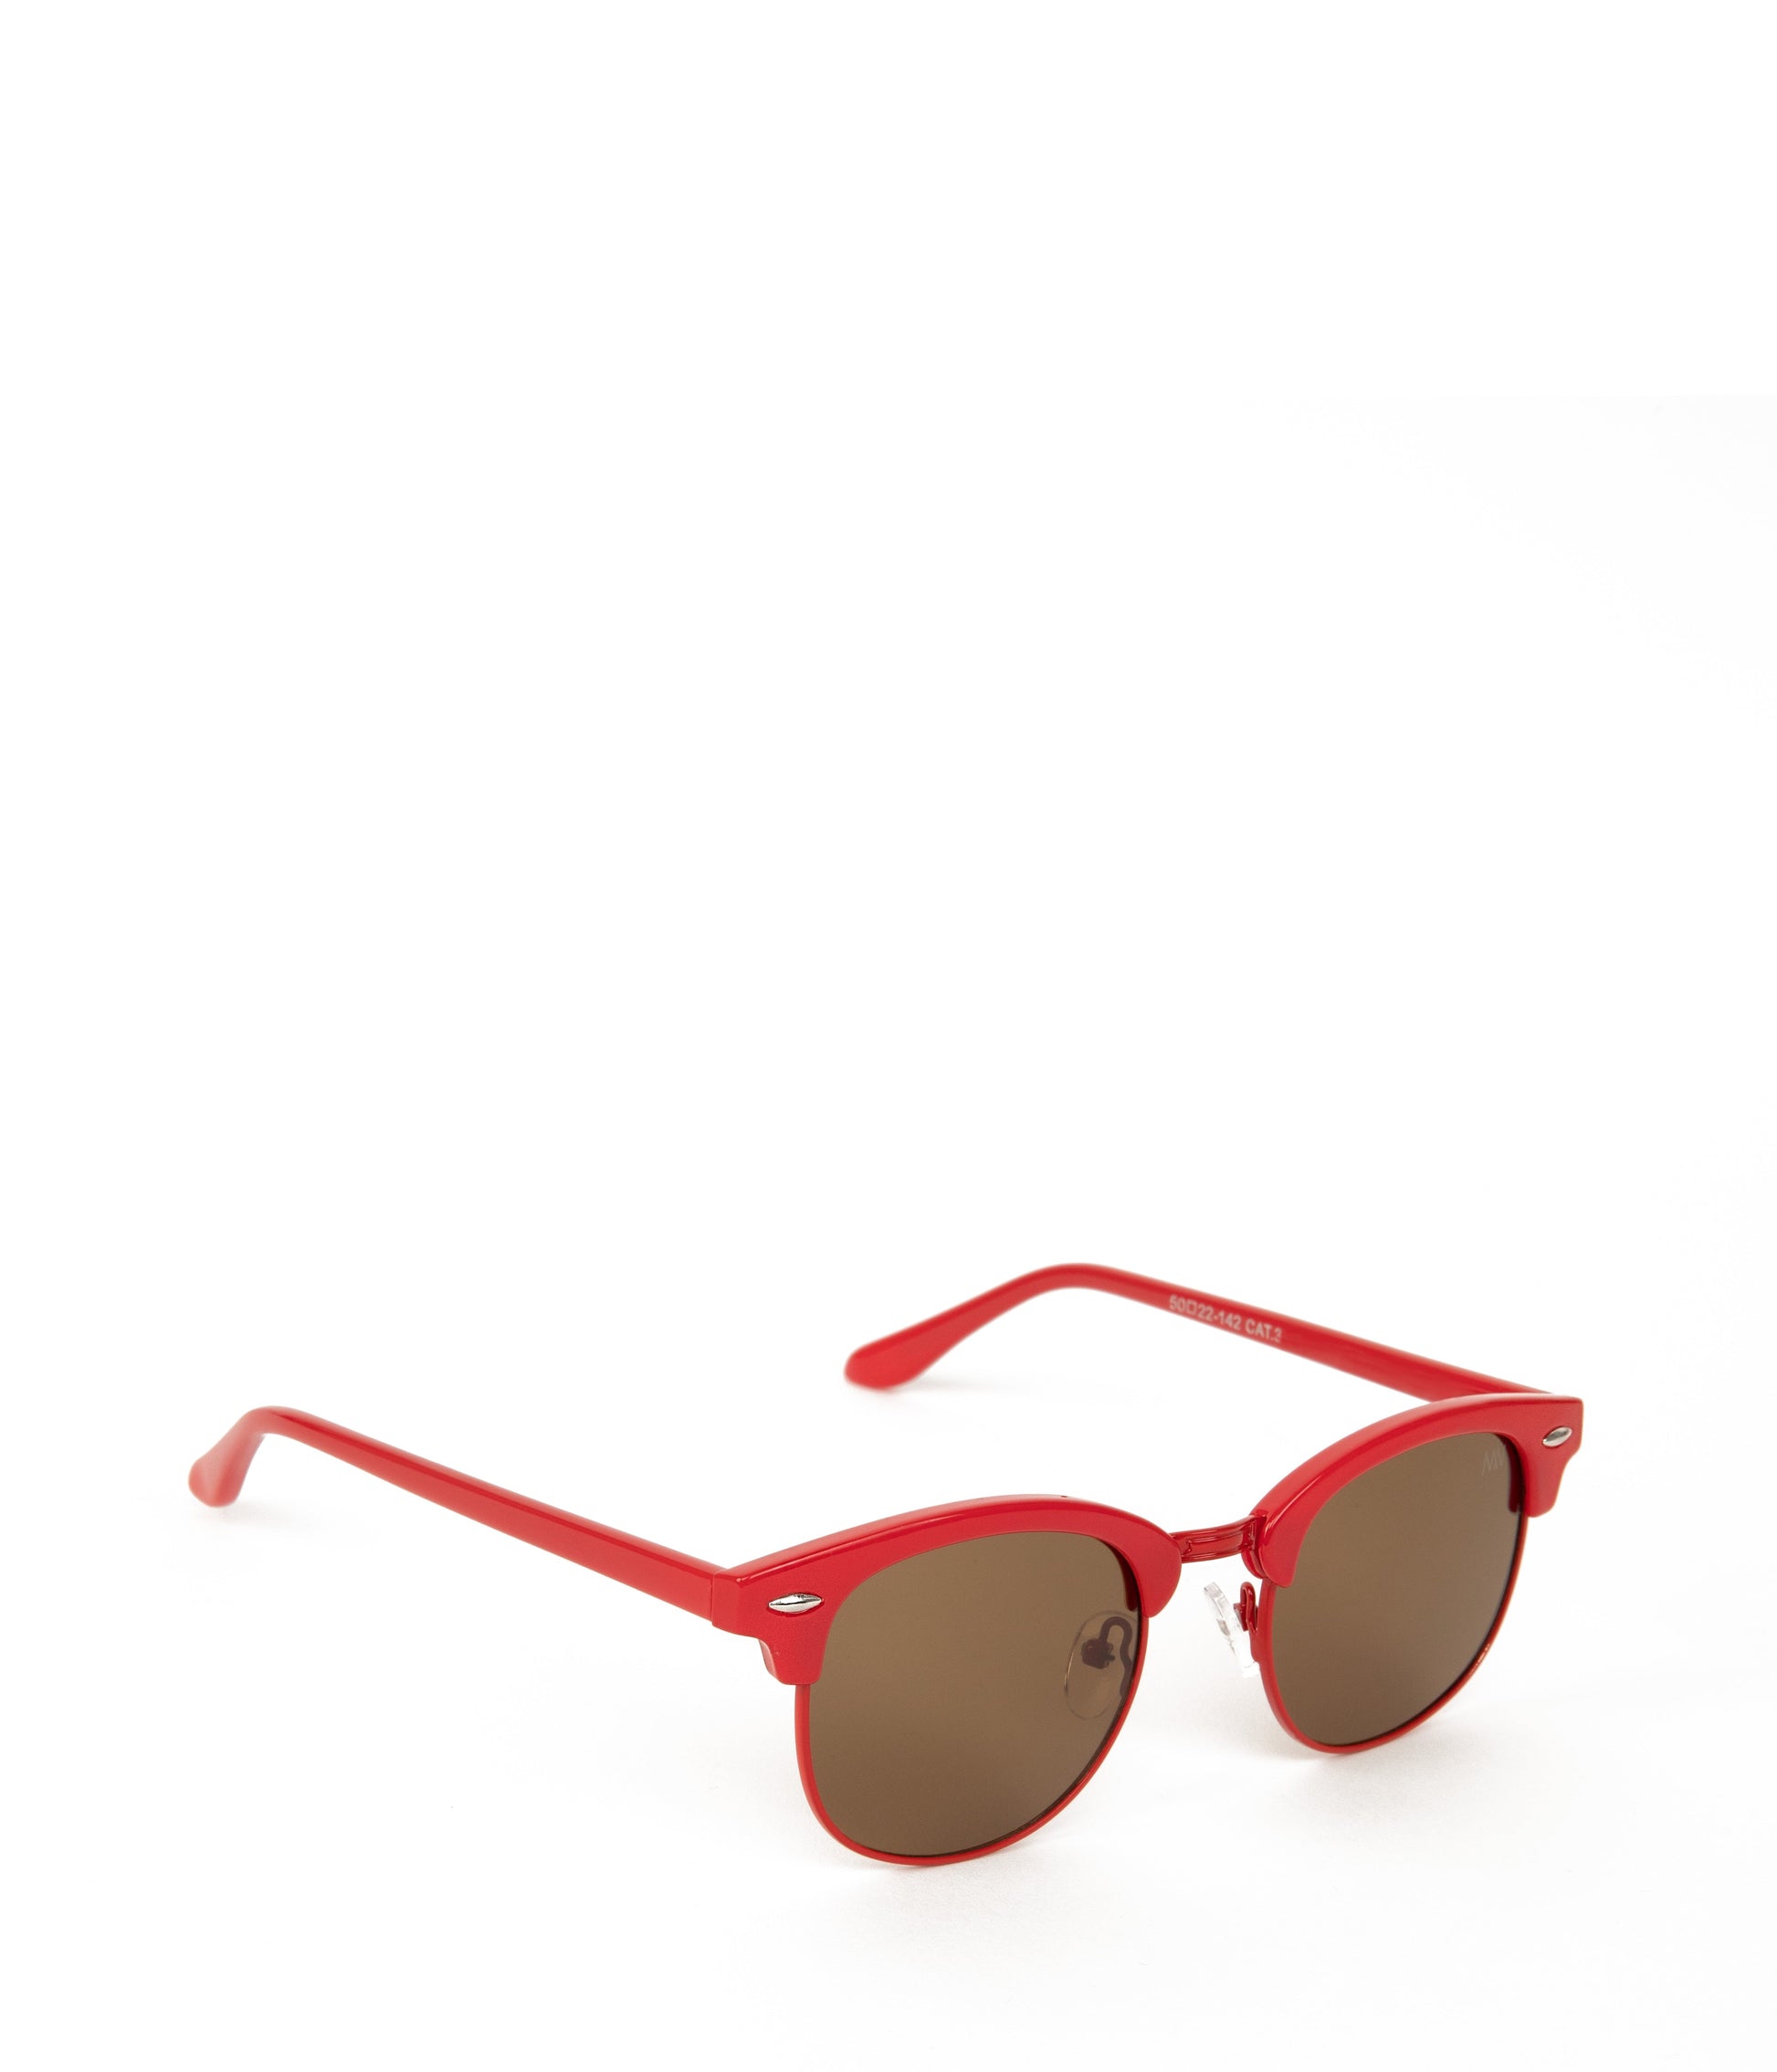 BUA Clubmaster Sunglasses | Color: Red, Brown - variant::red